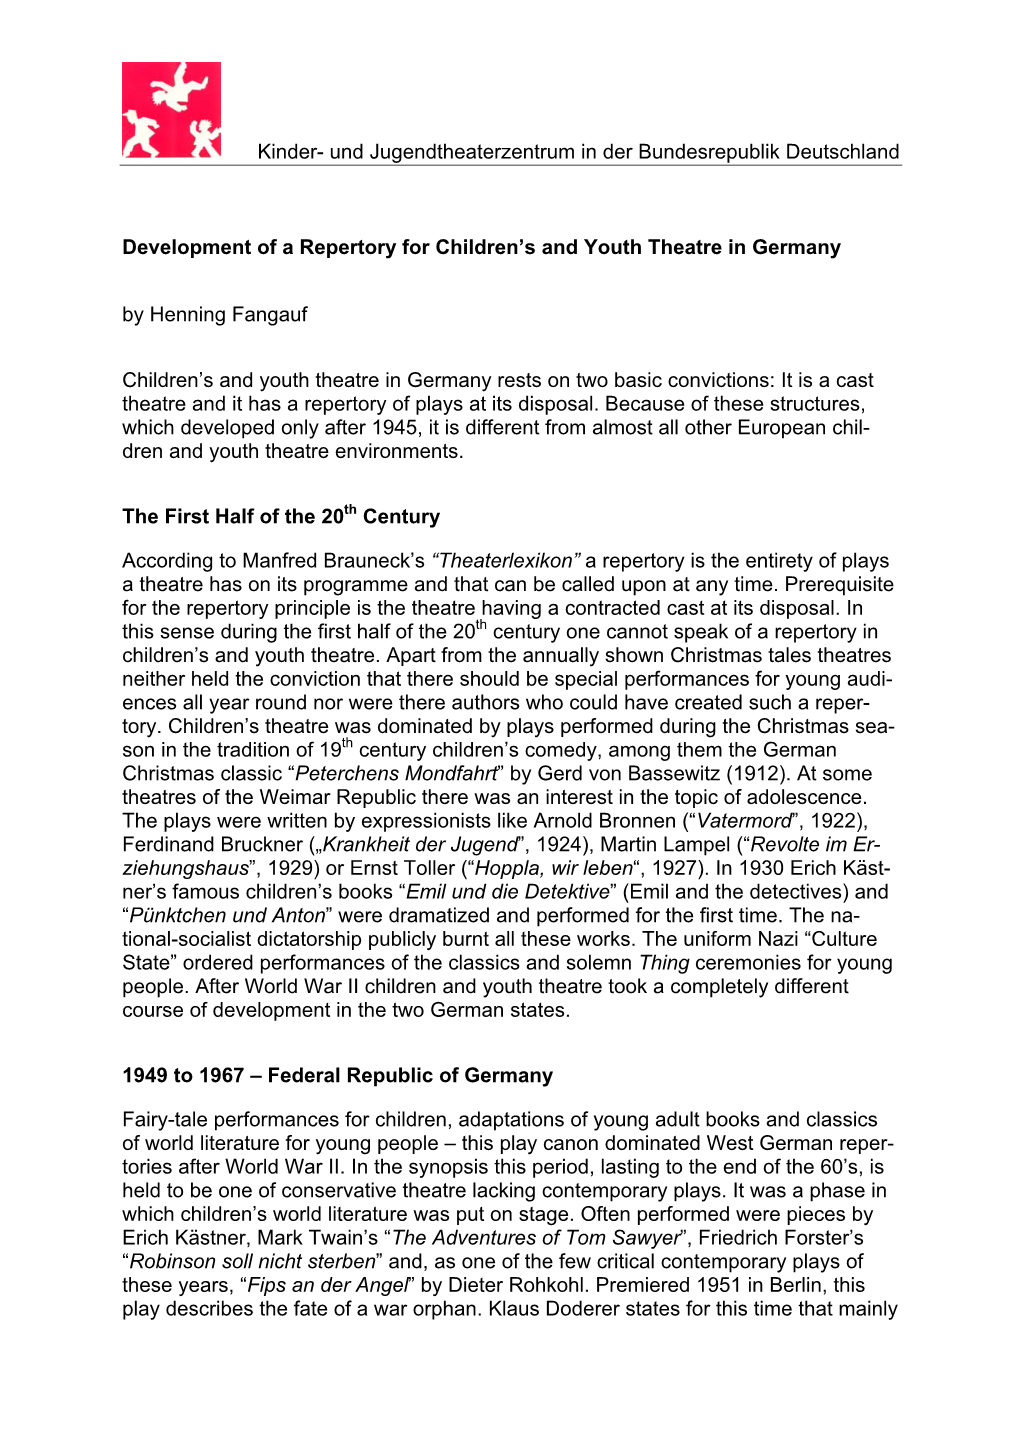 Development of a Repertory for Children’S and Youth Theatre in Germany by Henning Fangauf